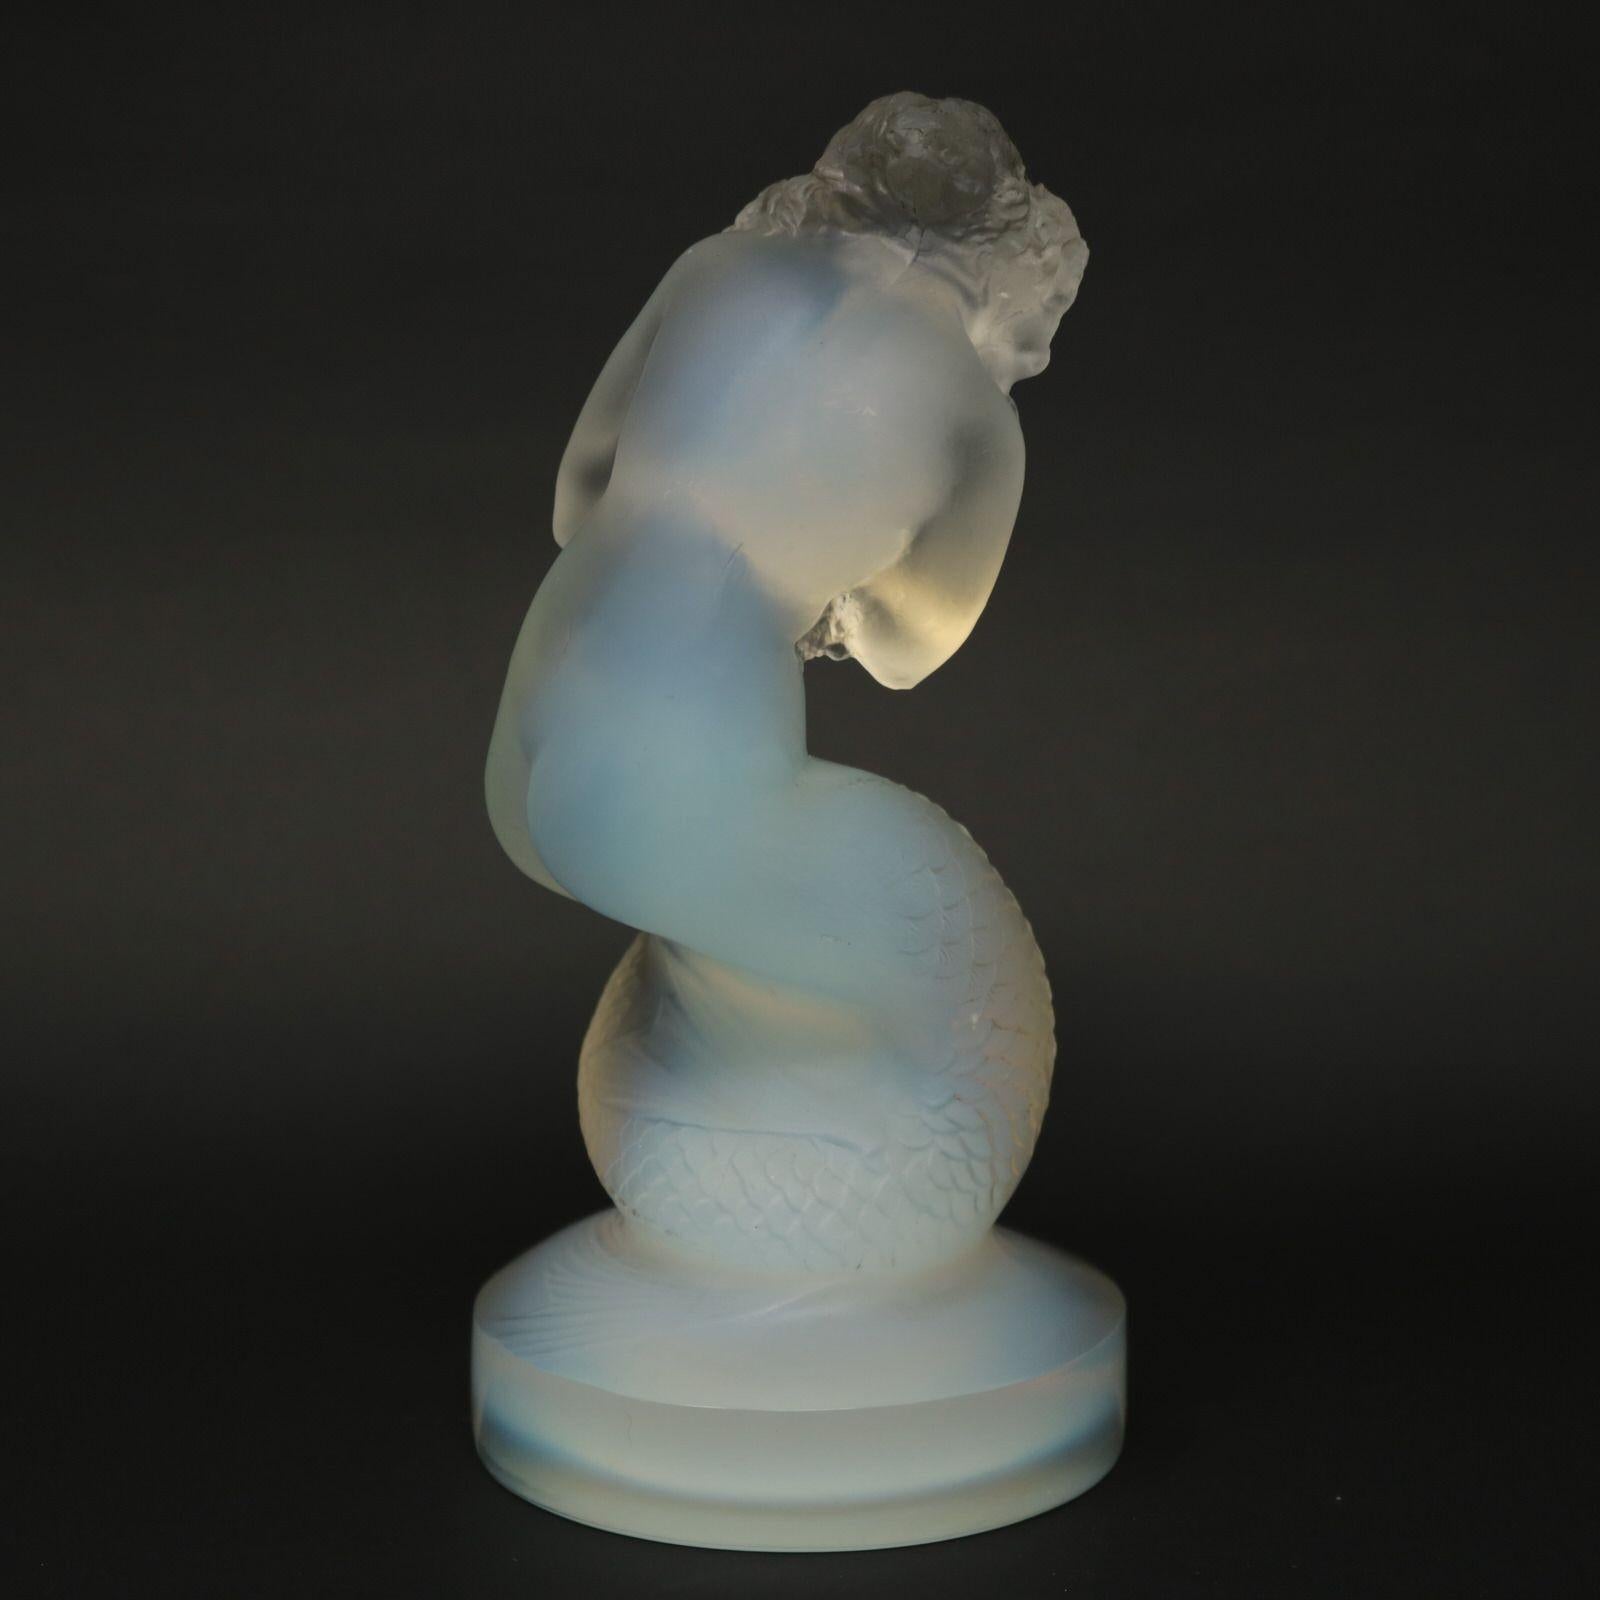 Rene Lalique Opalescent Glass 'Naiade' Statuette In Excellent Condition For Sale In Chelmsford, Essex